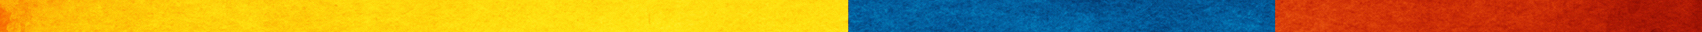 Colombian flag